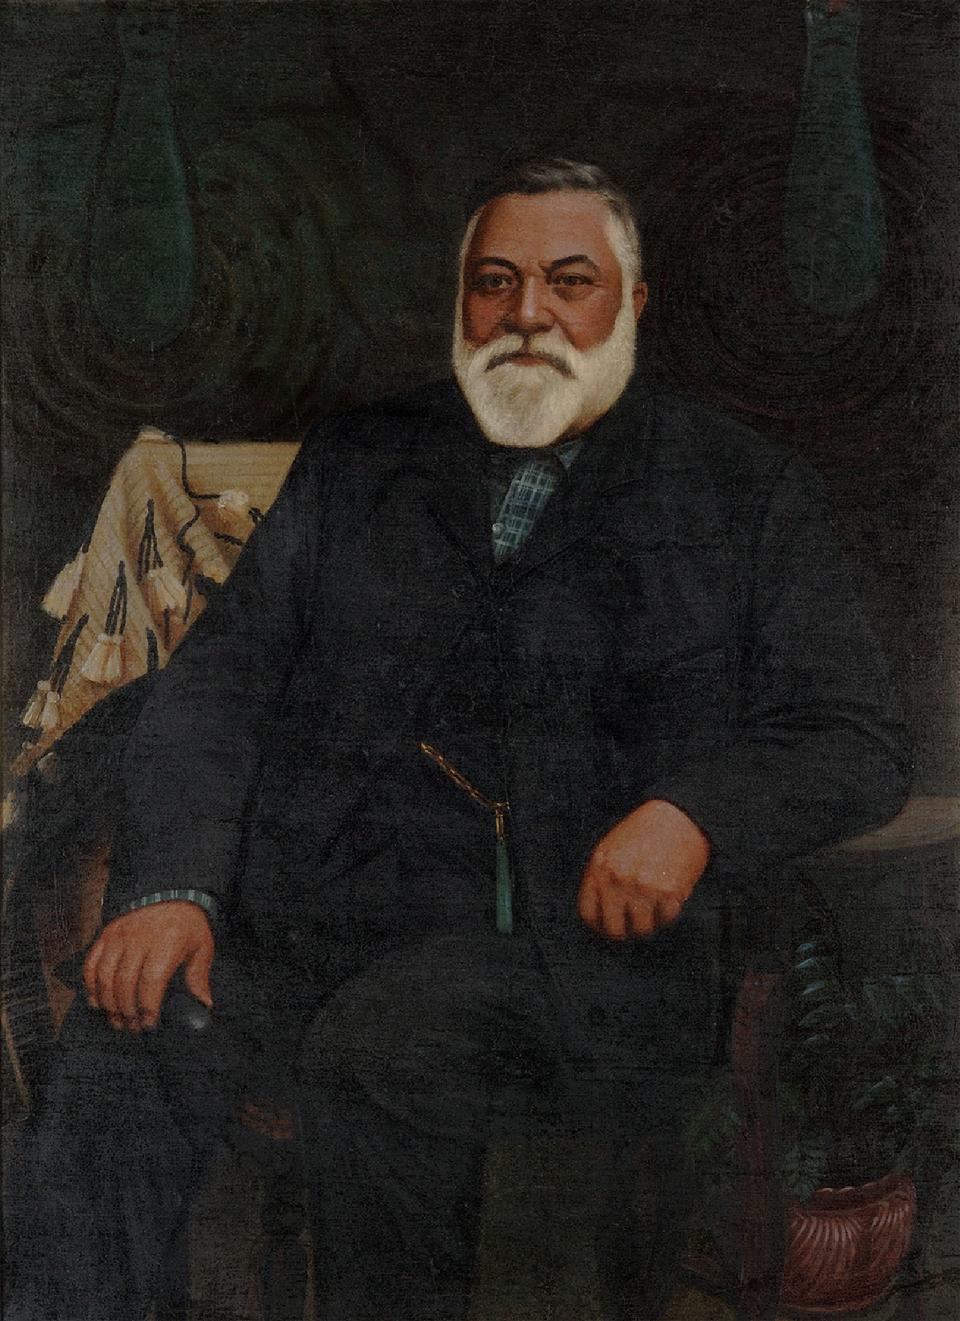 Joseph Gaut (Attributed) Hoani Te Whatahoro Jury (c.1880) oil on canvas Collection of Aratoi Wairarapa Museum of Art and History. On loan from the Jury family.